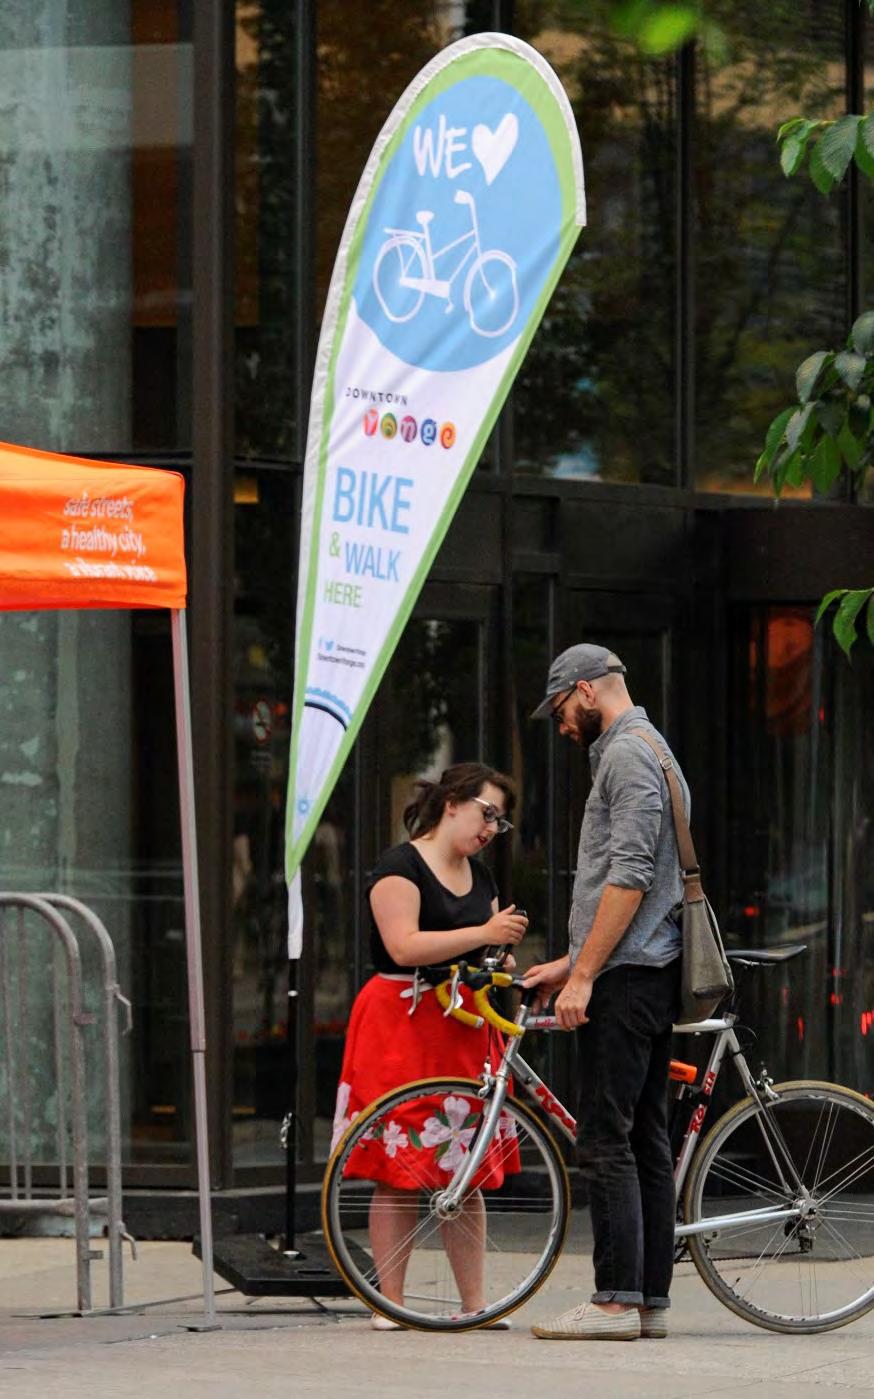 Bike Valet The Service How it works. Guests sign in their bikes and receive numbered parking tags.